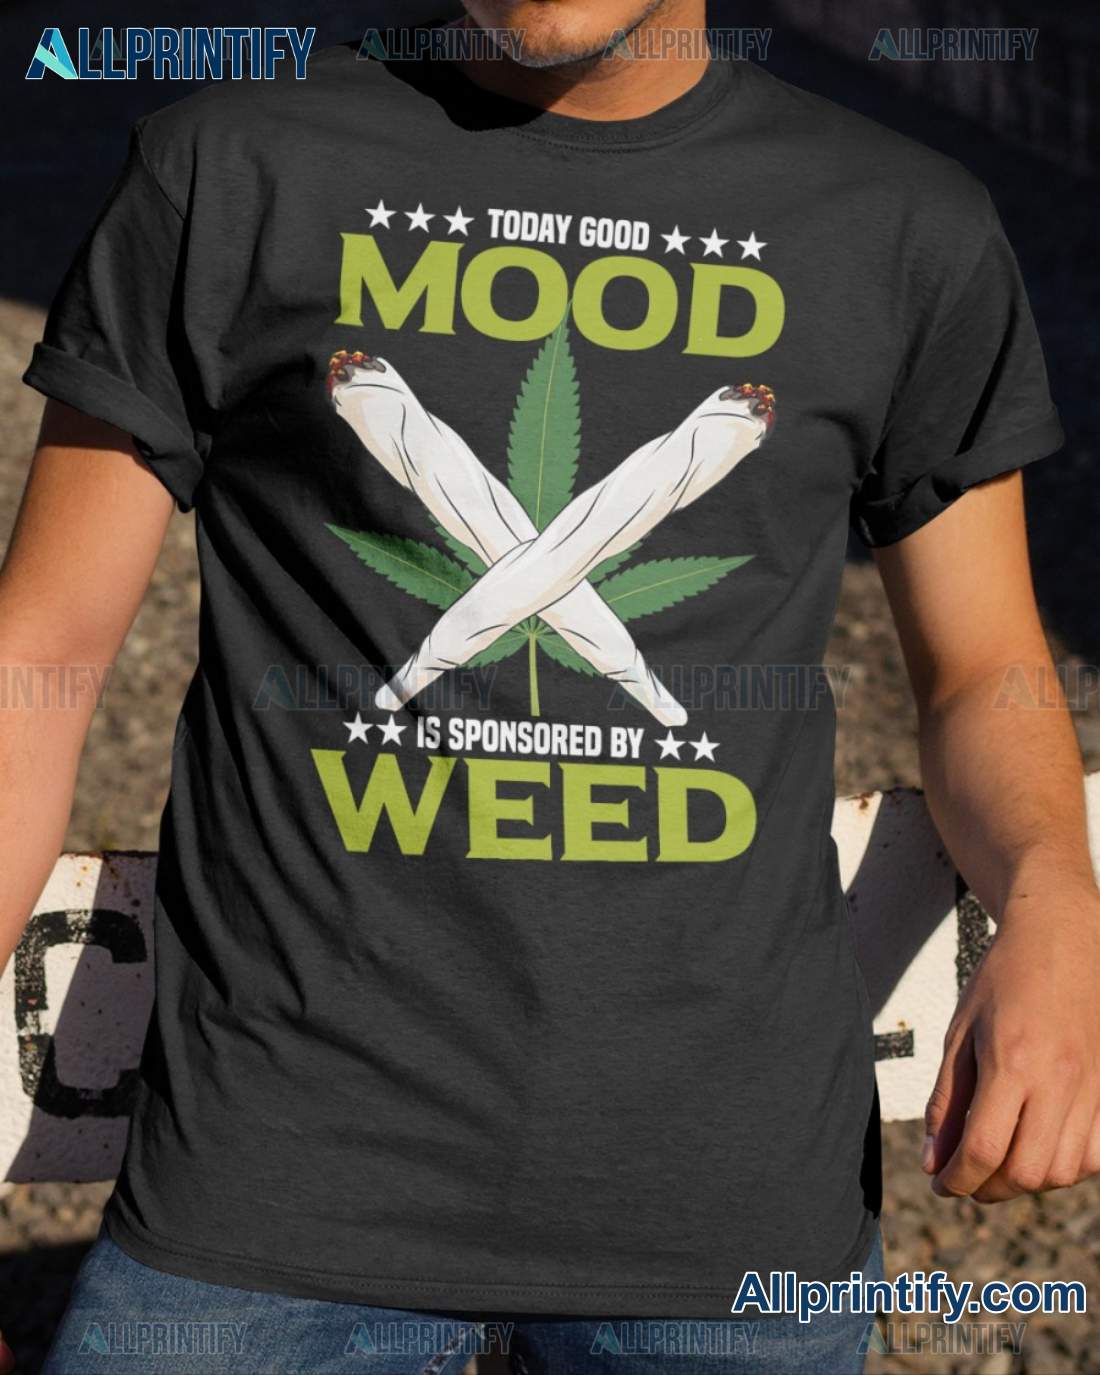 To Day Good Mood Is Sponsored By Weed Shirt, Hoodie